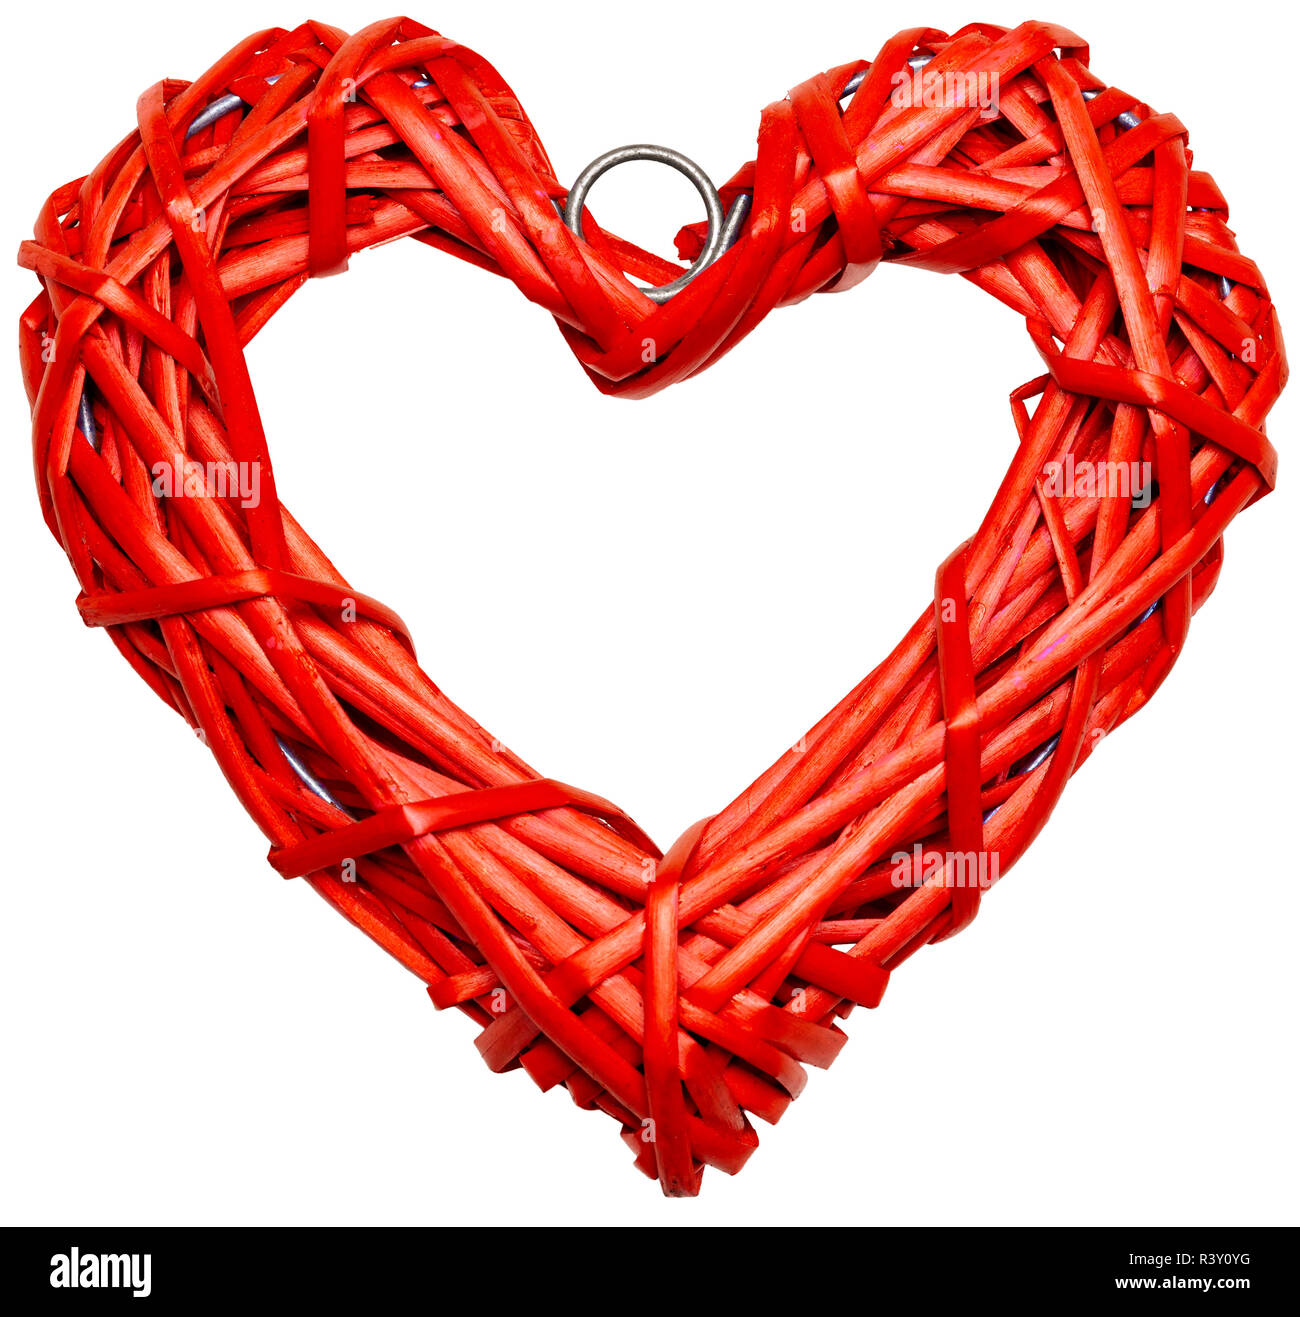 Red heart shaped braided wicker isolated on white background Stock Photo